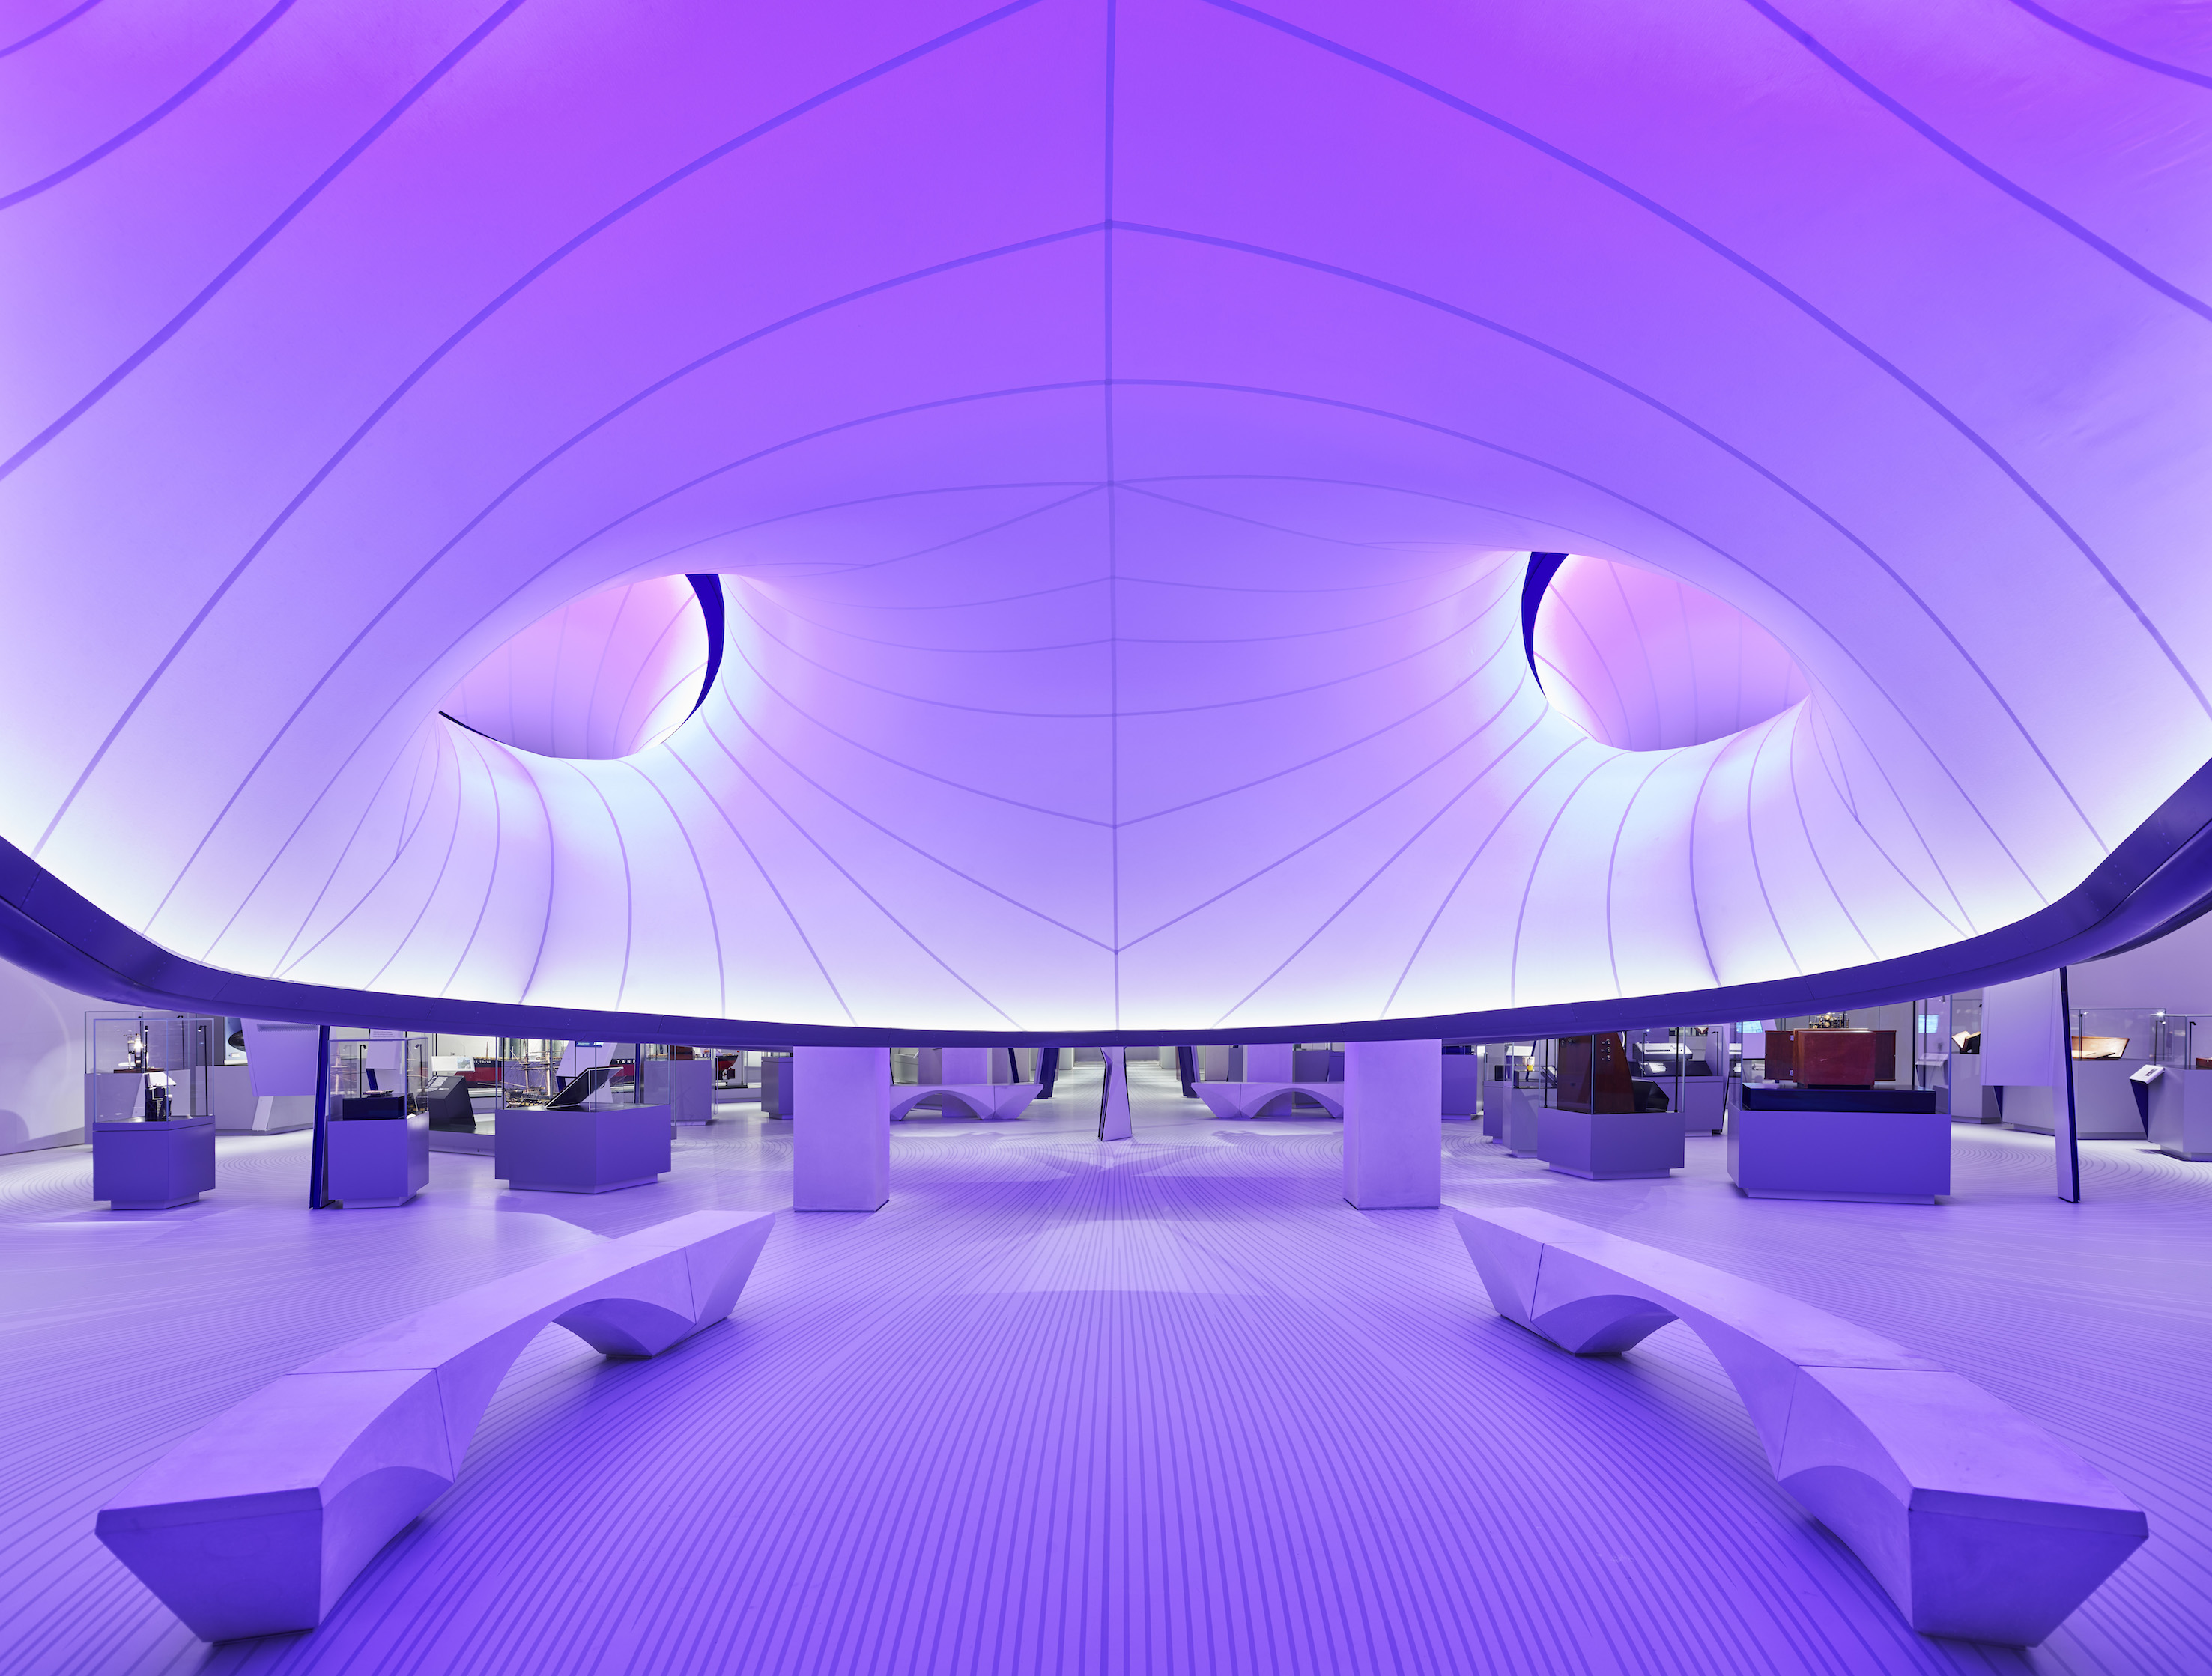 Purple Structure in thhe Mathematics: The Winton Gallery